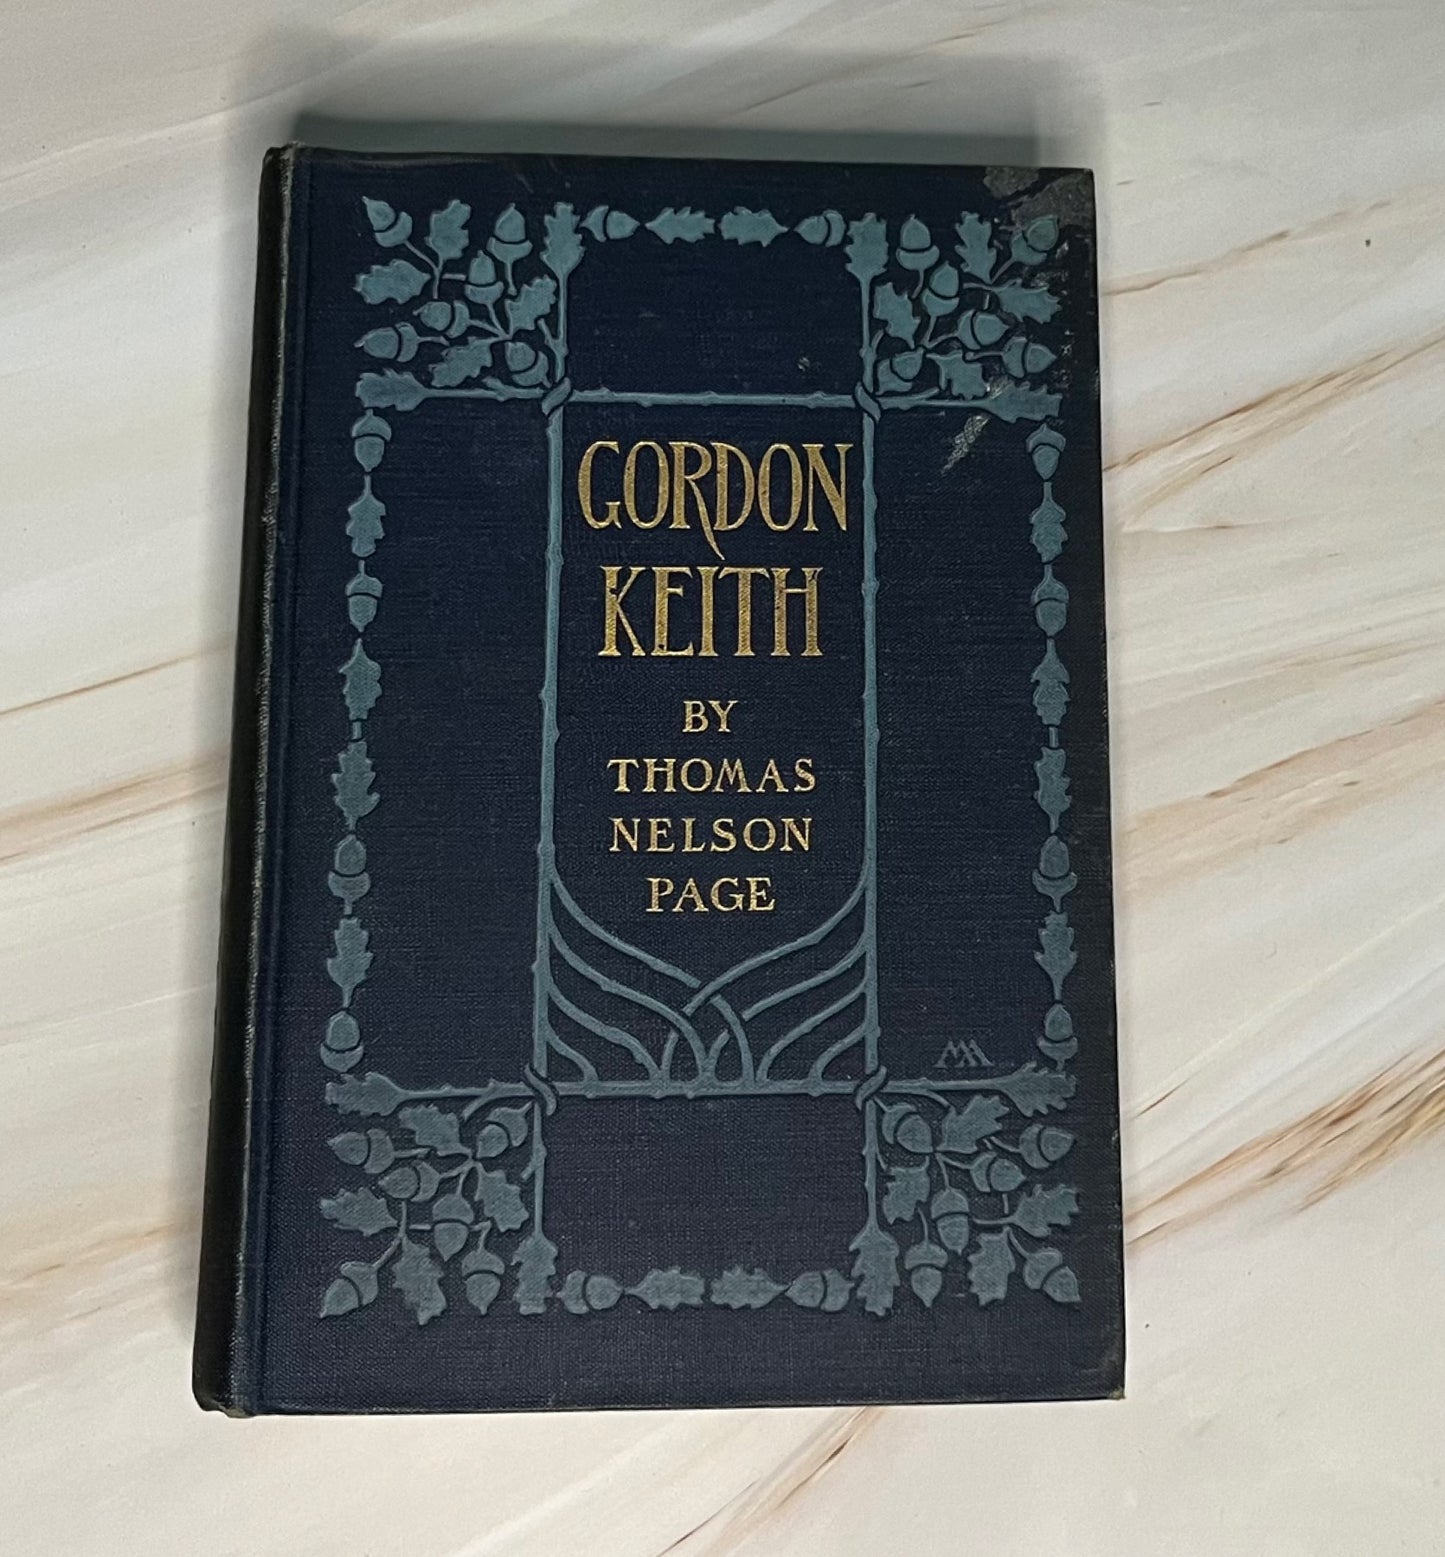 Gordon Keith by Thomas Nelson Page - Antique 1903 Edition